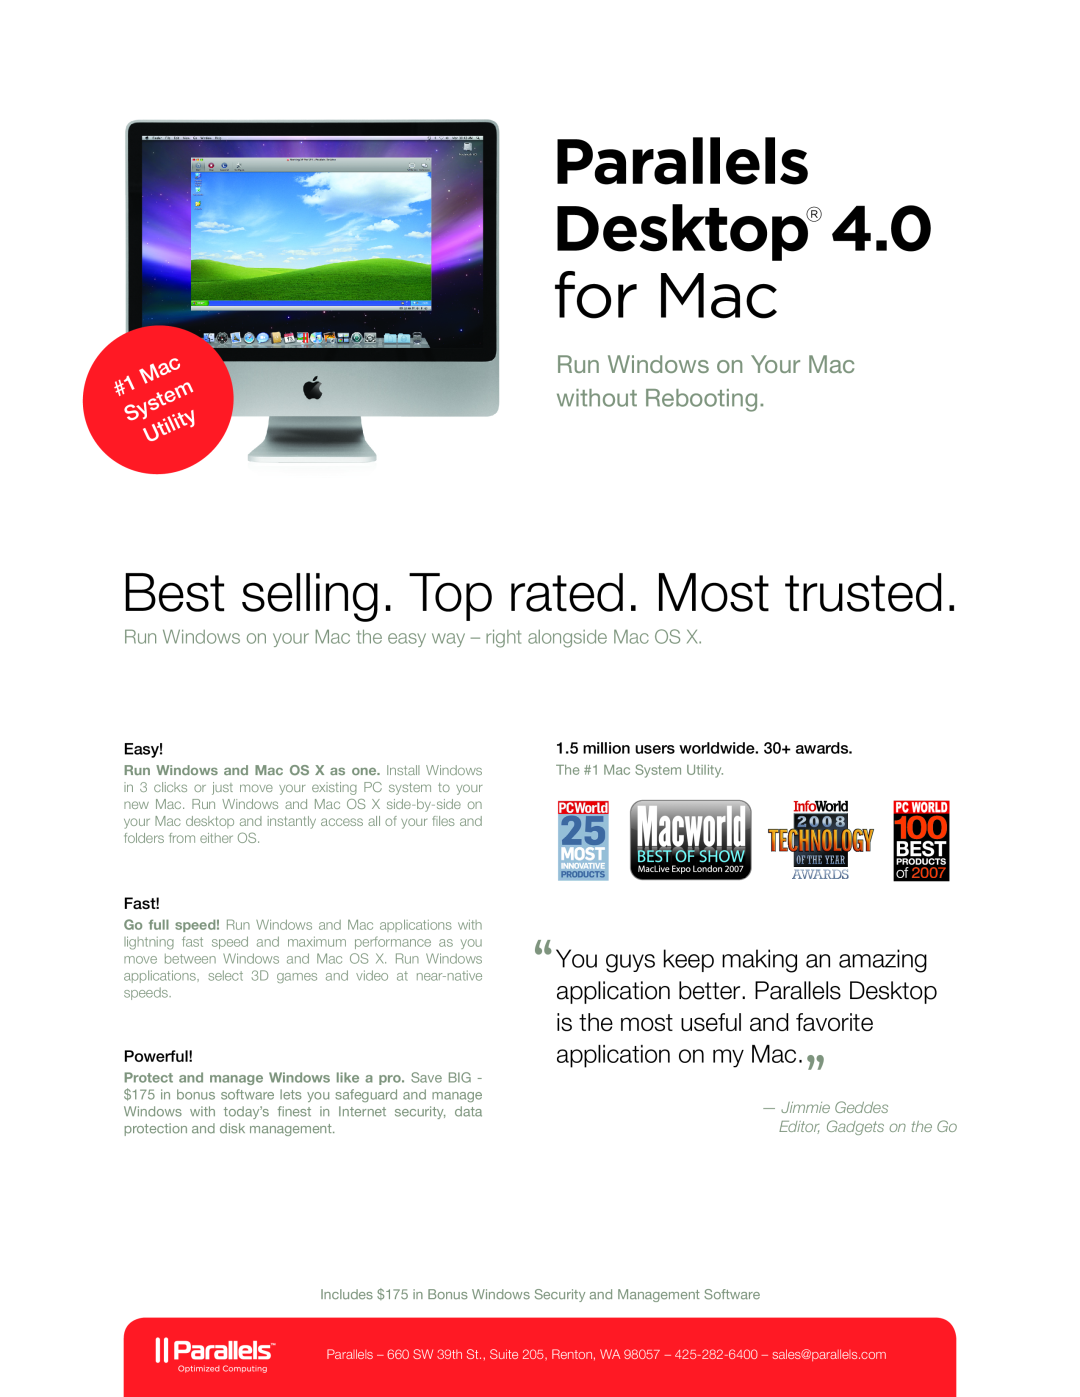 EZQuest manual Fast, Powerful, Parallels Desktop 4.0 for Mac, Best selling. Top rated. Most trusted, Easy 